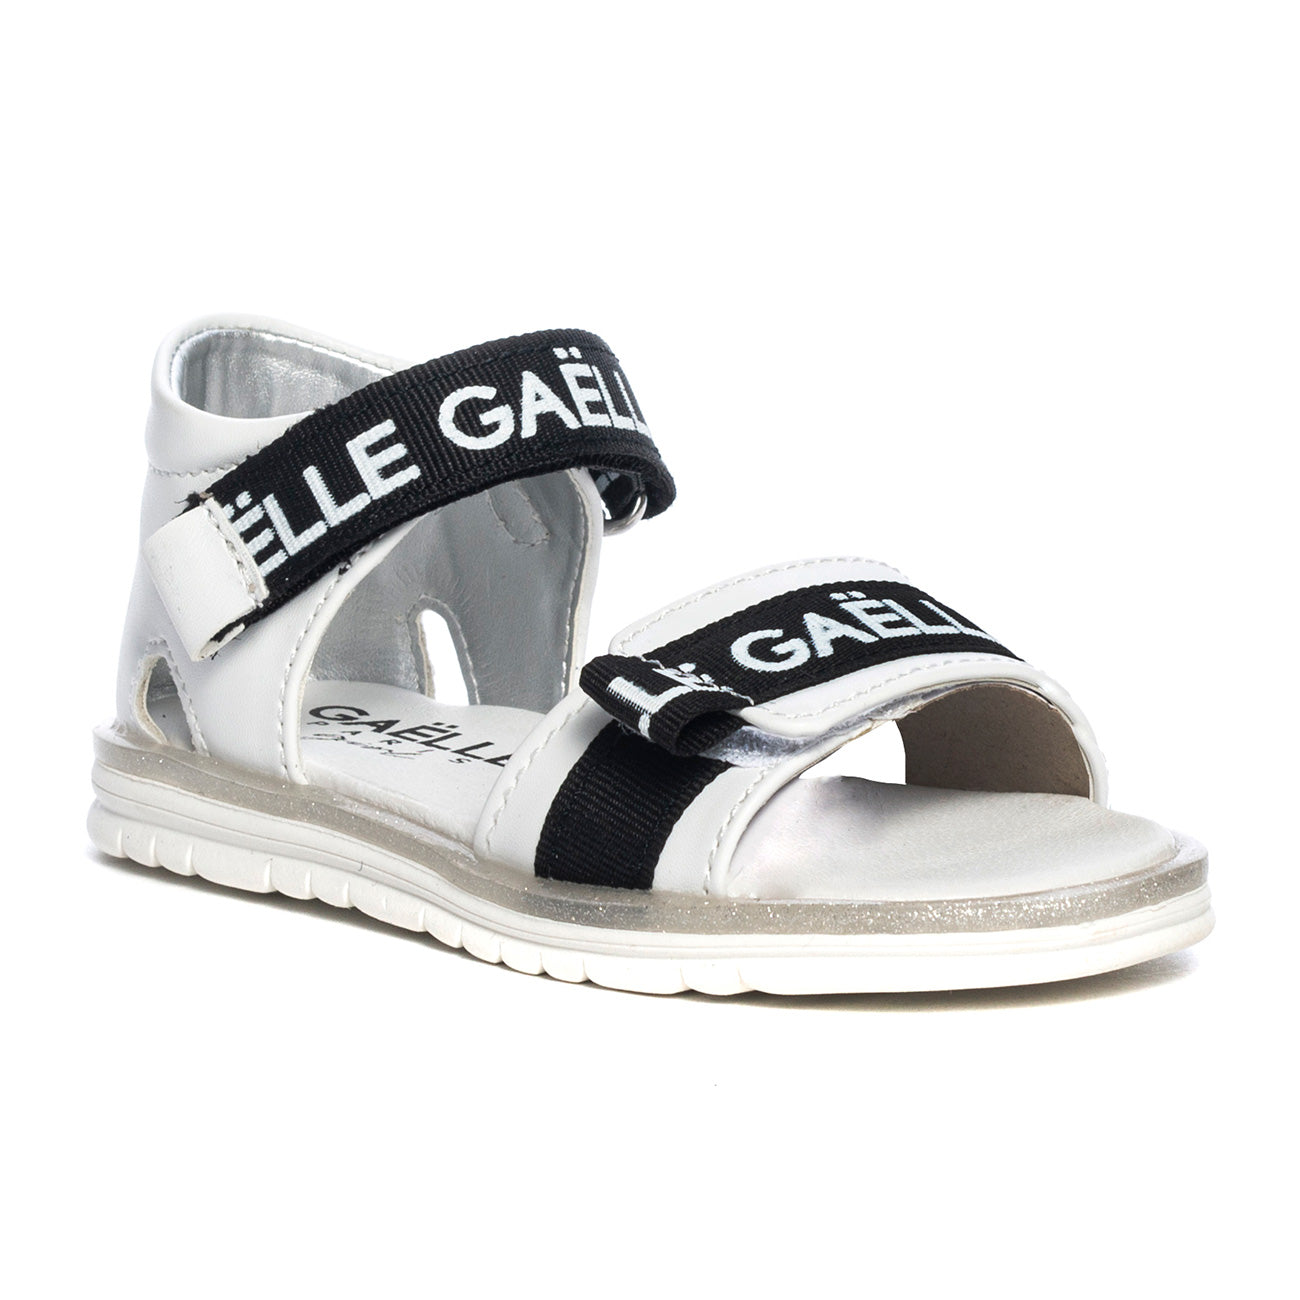 Sneakers Gaelle G1461 Bianche